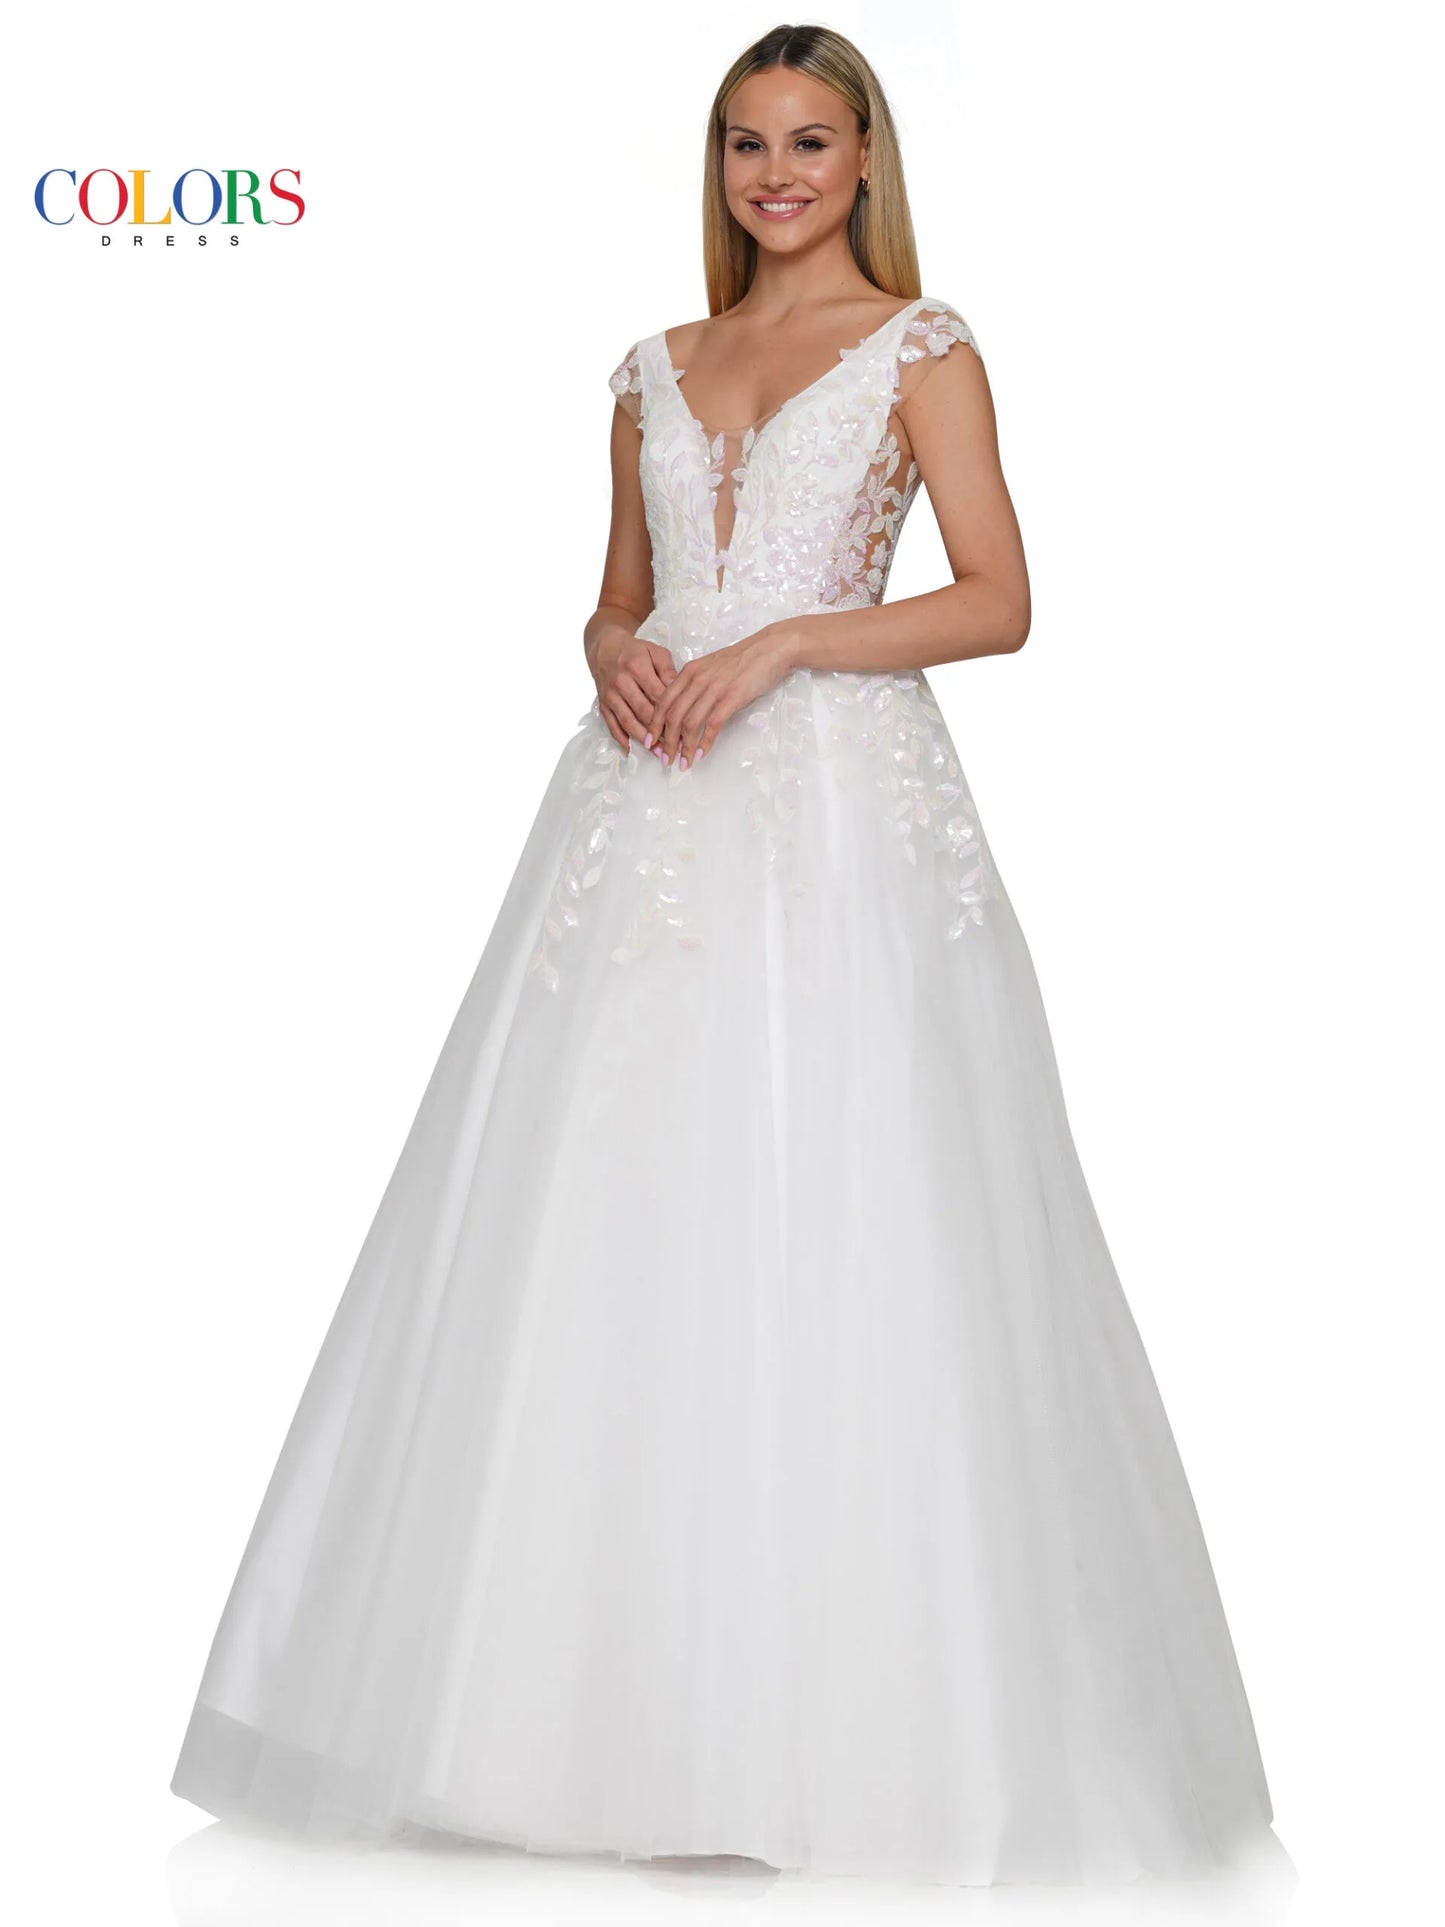 With sheer side panels, the Colors Dress 3239 ballgown offers a touch of elegance to your prom or pageant look. The sheer sequin lace adds a subtle shimmer, making you stand out in the crowd. Available in plus sizes, this formal gown is perfect for any special occasion.  Sizes: 0-22  Colors: Light Blue, Off White, Deep Green, Hot Pink